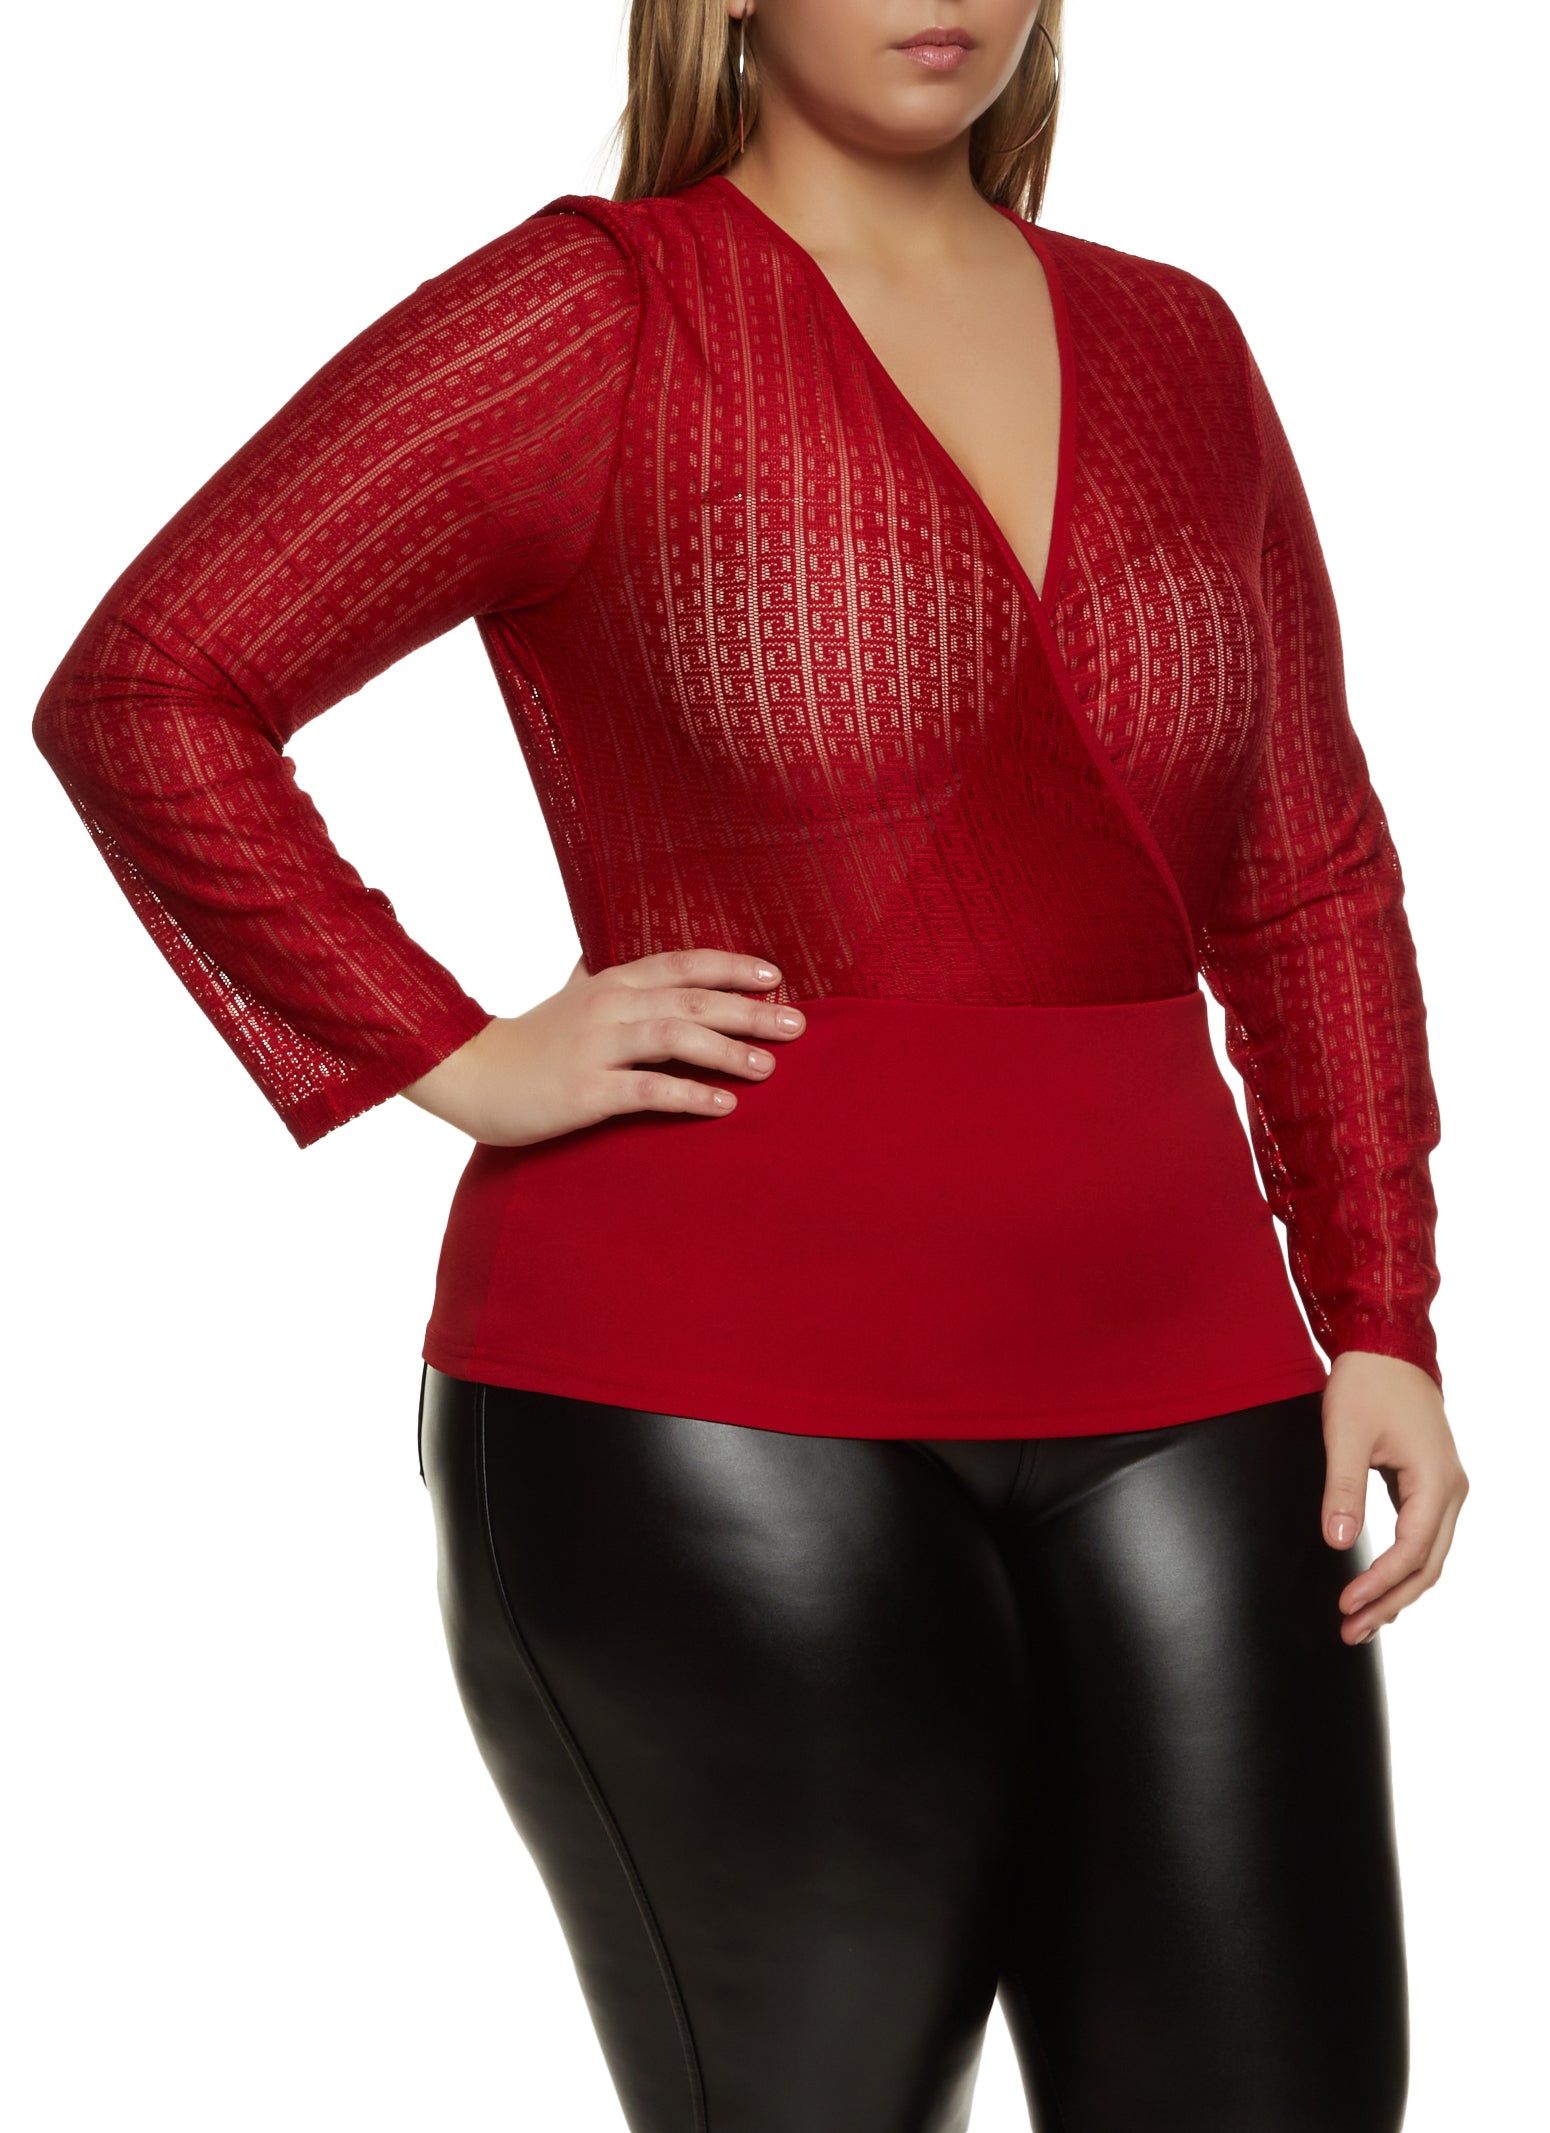 Plus Size Wrap Tops, Everyday Low Prices